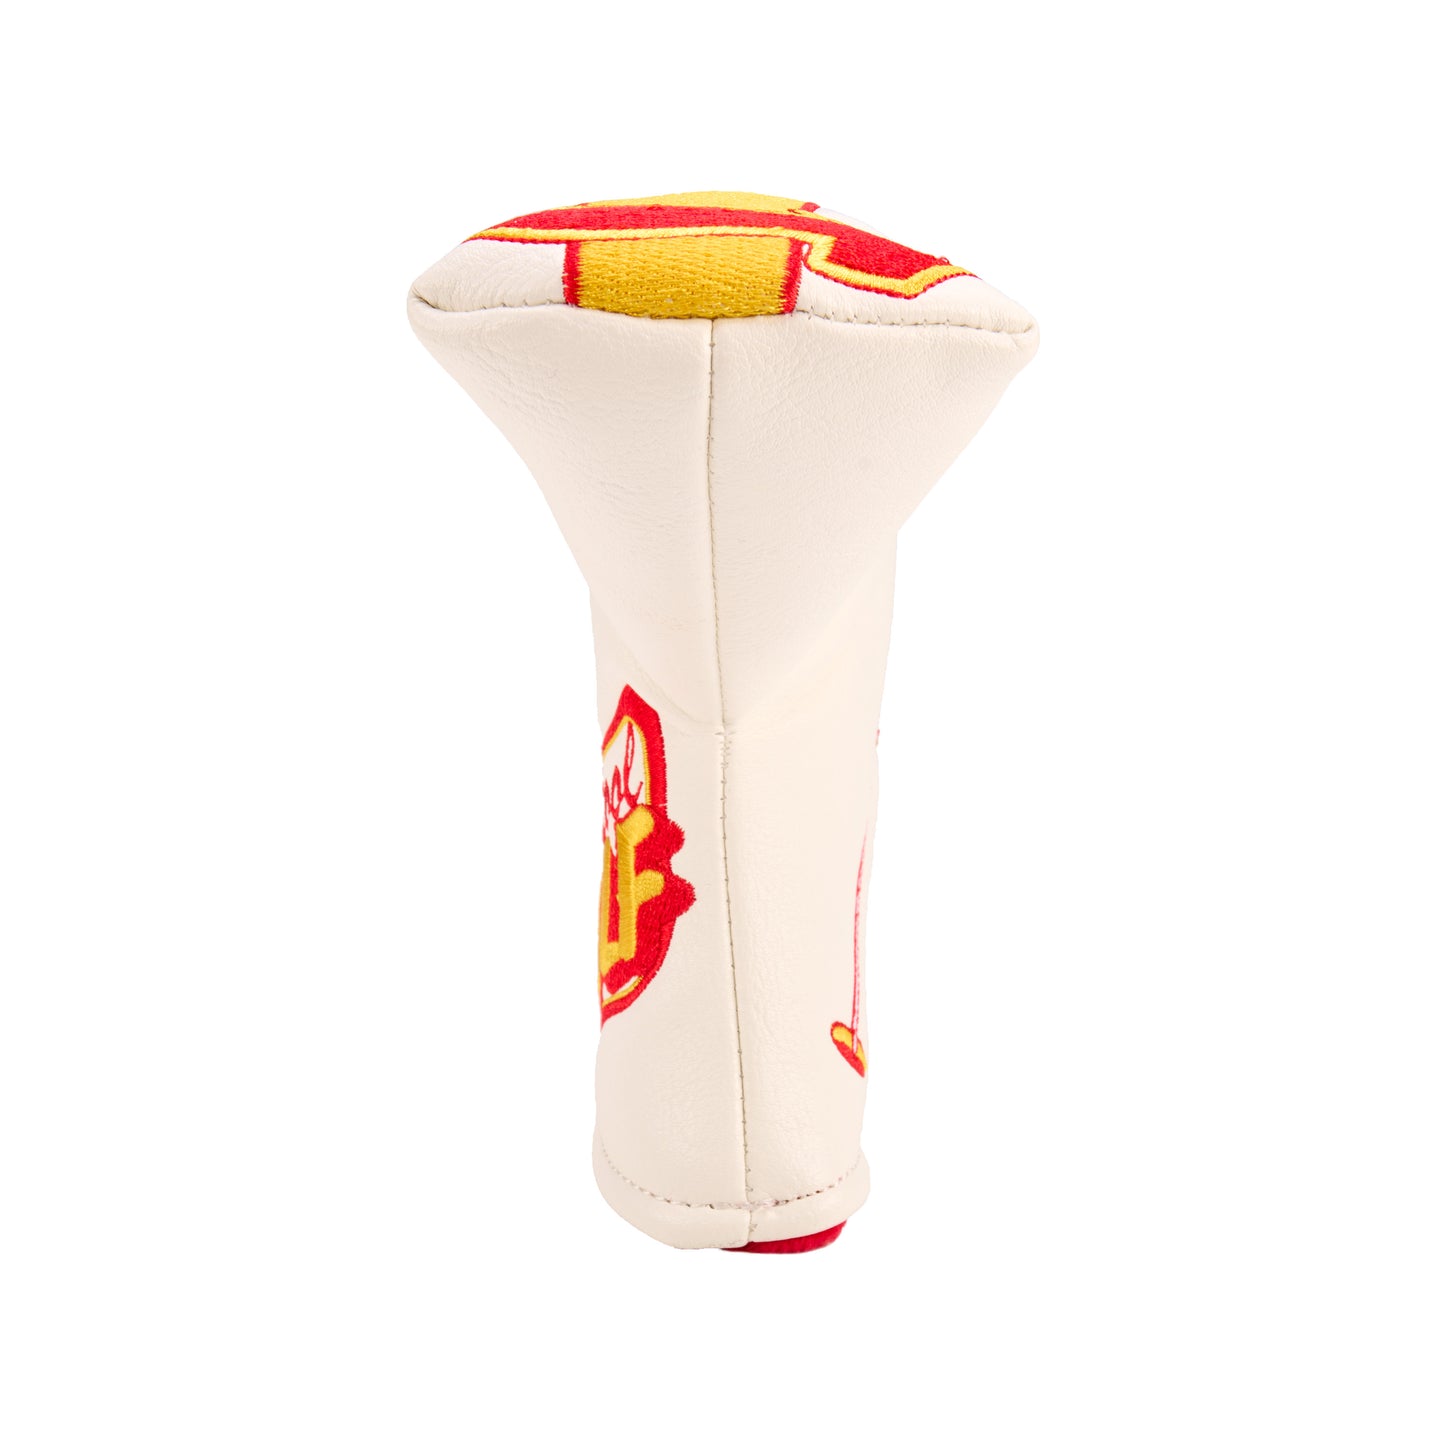 Barstool Golf "The Turn" Blade Putter Cover